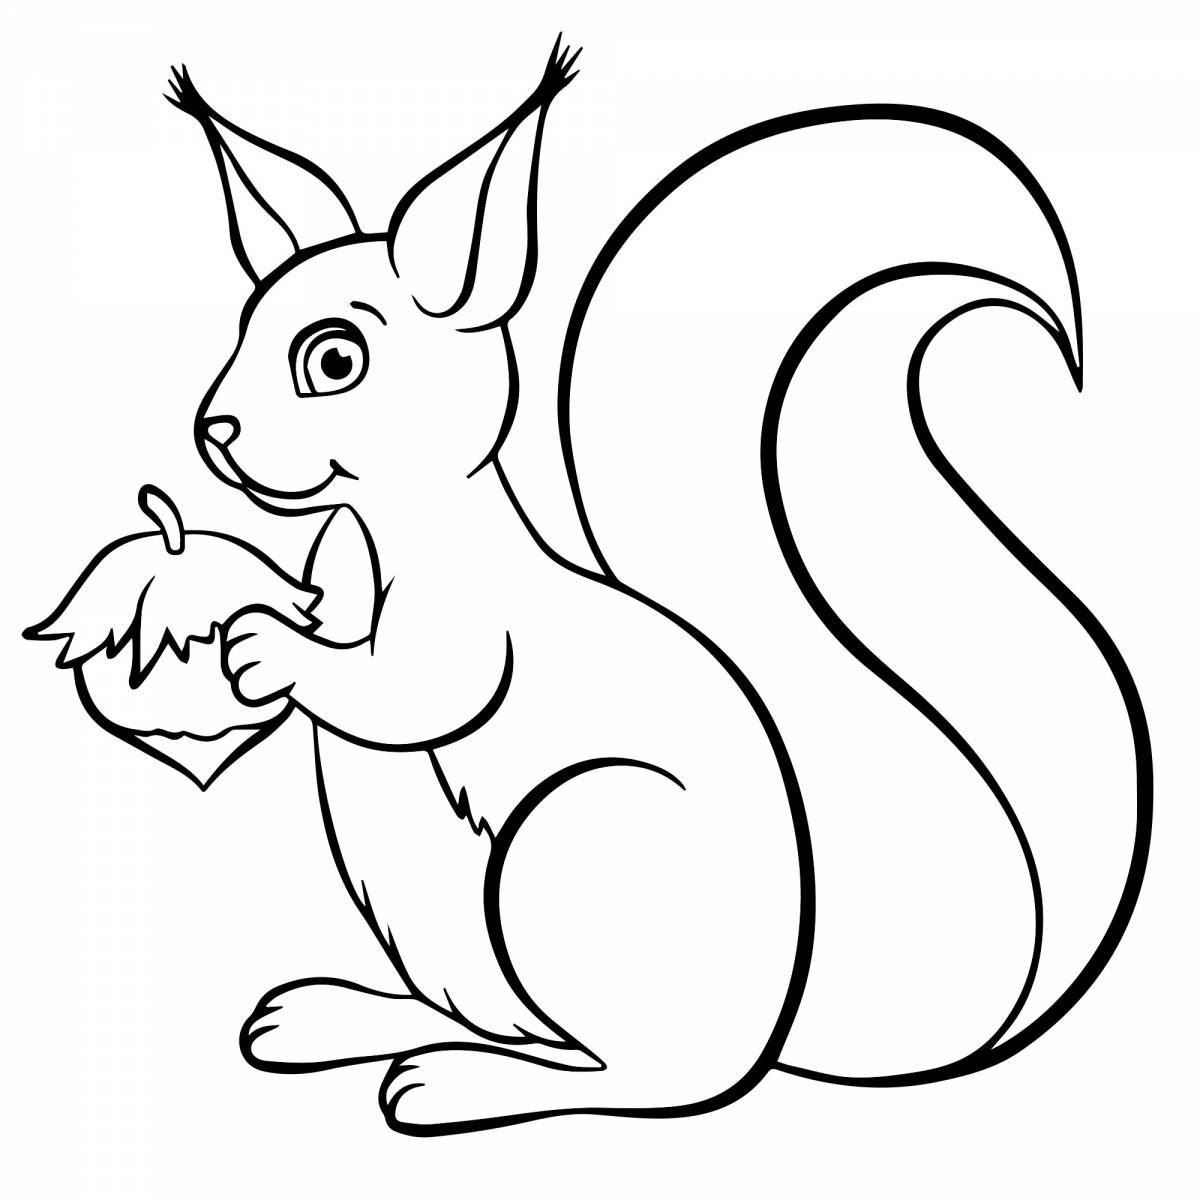 Sparkling squirrel coloring book for kids